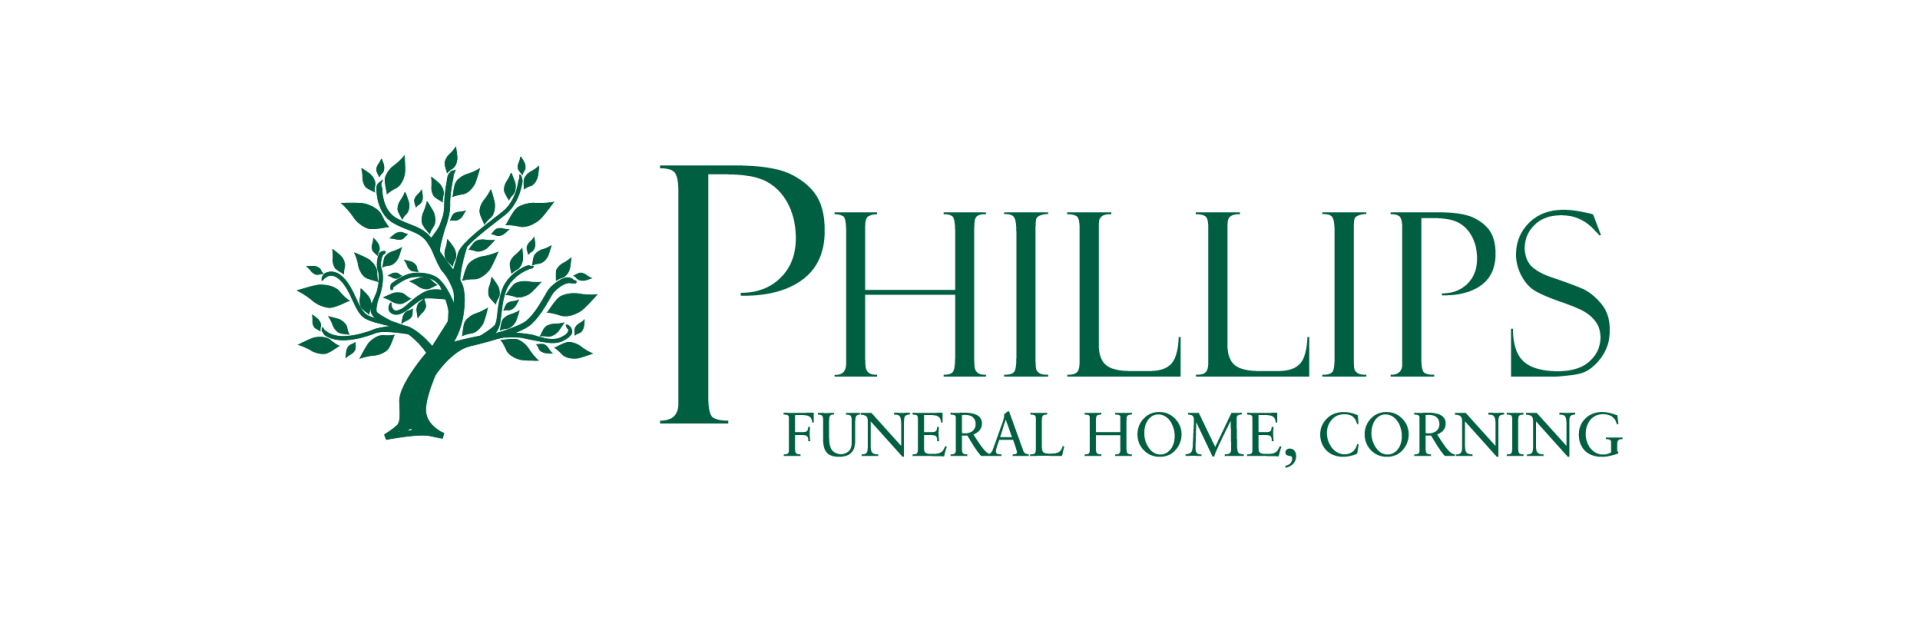 Phillips Funeral Home in Corning, Southern Finger Lakes, NY